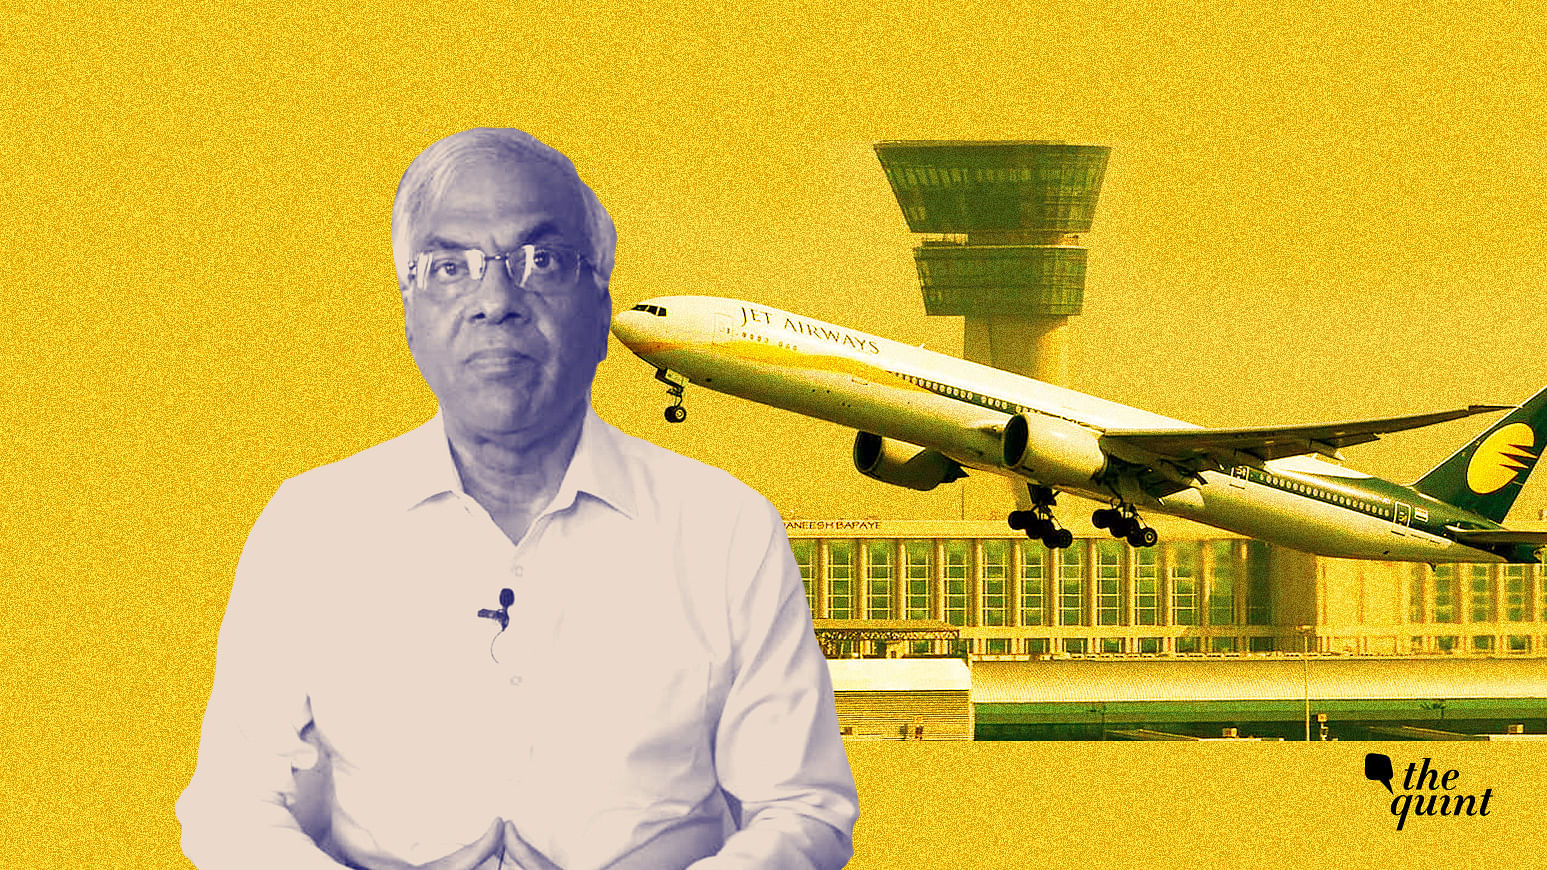 Aviation expert and former Director of Air India, Jitendra Bhargava weighs in on the Jet Airways crisis.